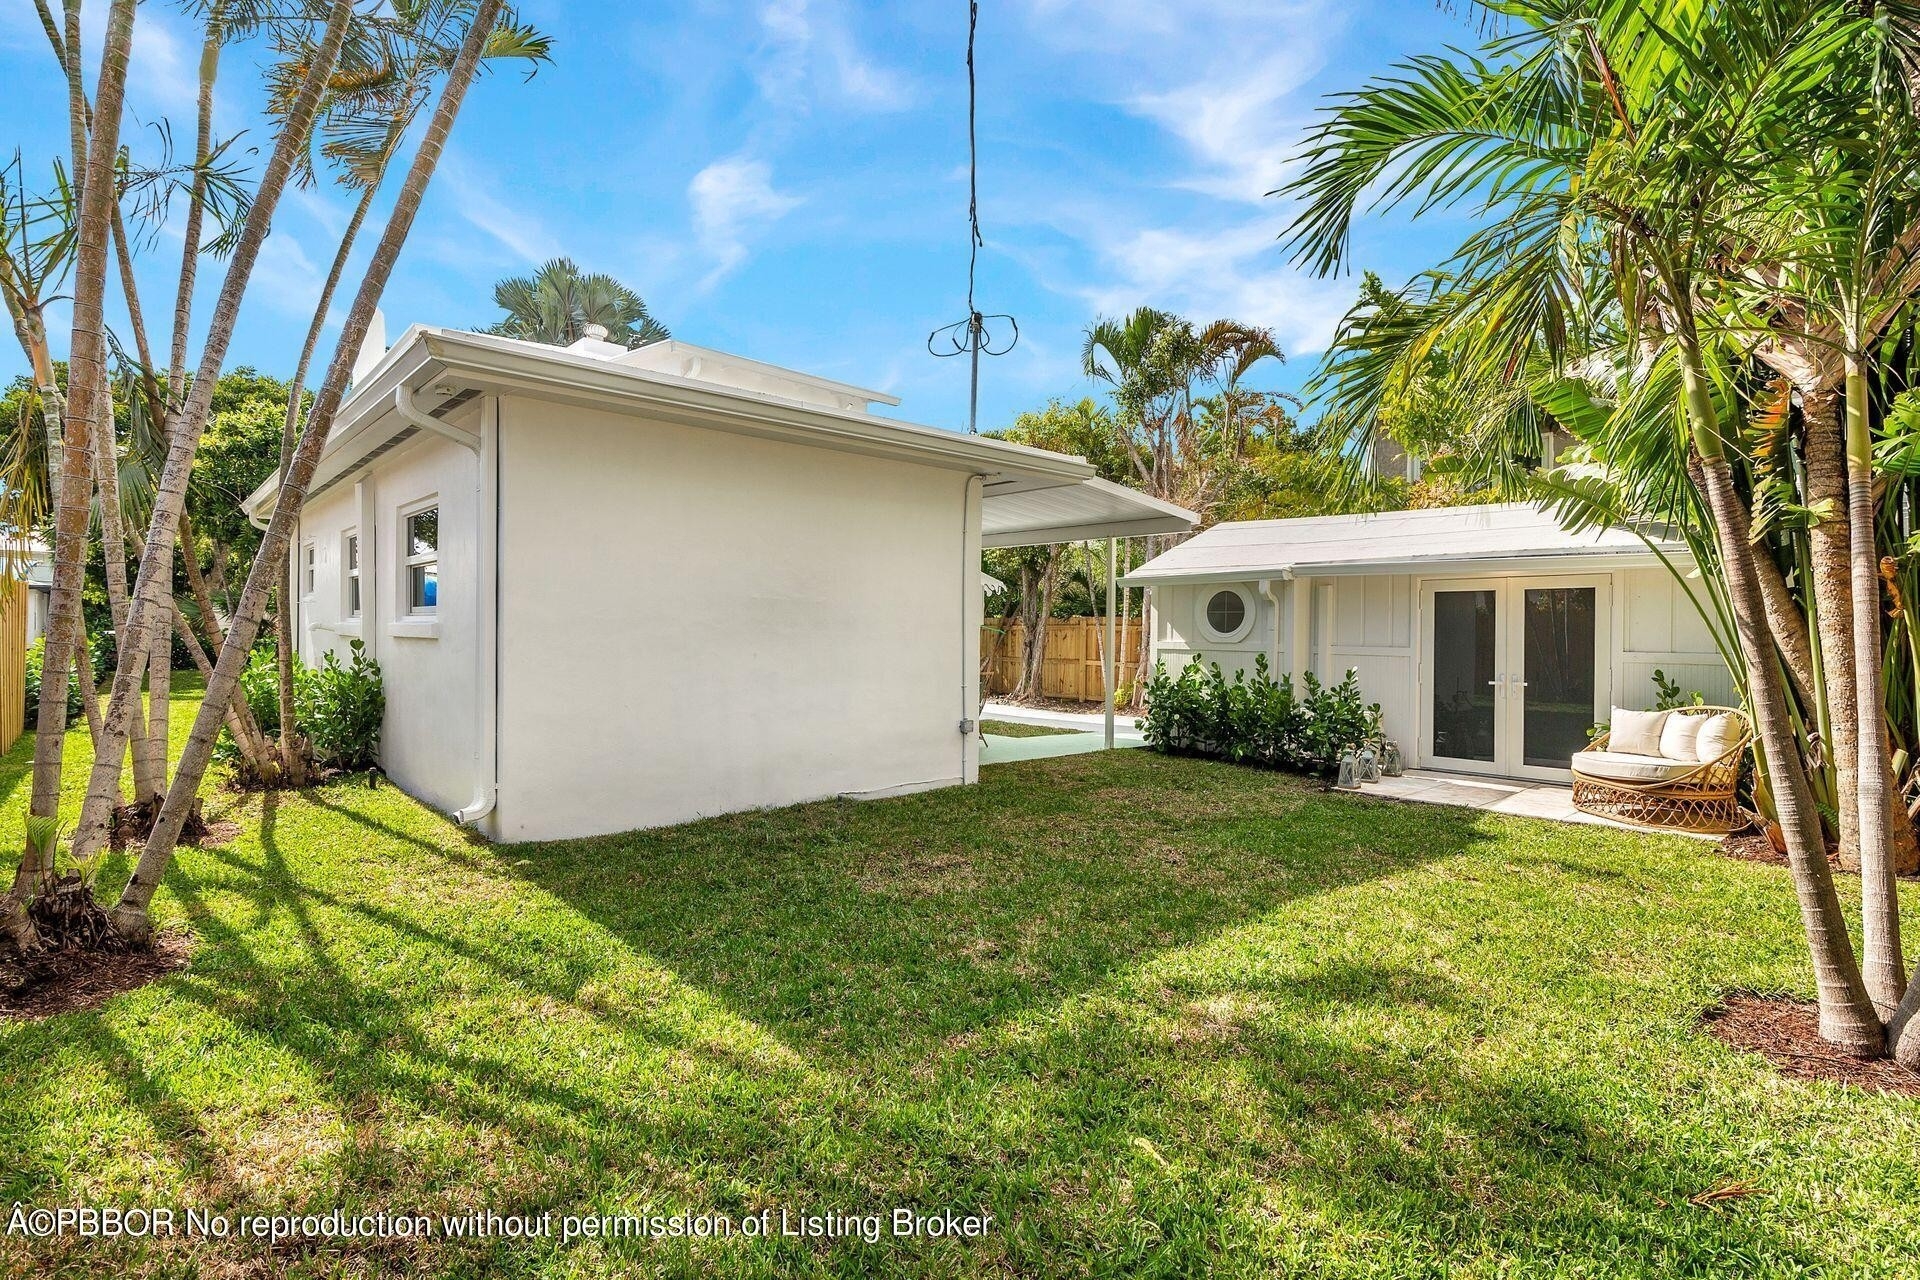 26. Single Family Homes for Sale at Central Park, West Palm Beach, FL 33405